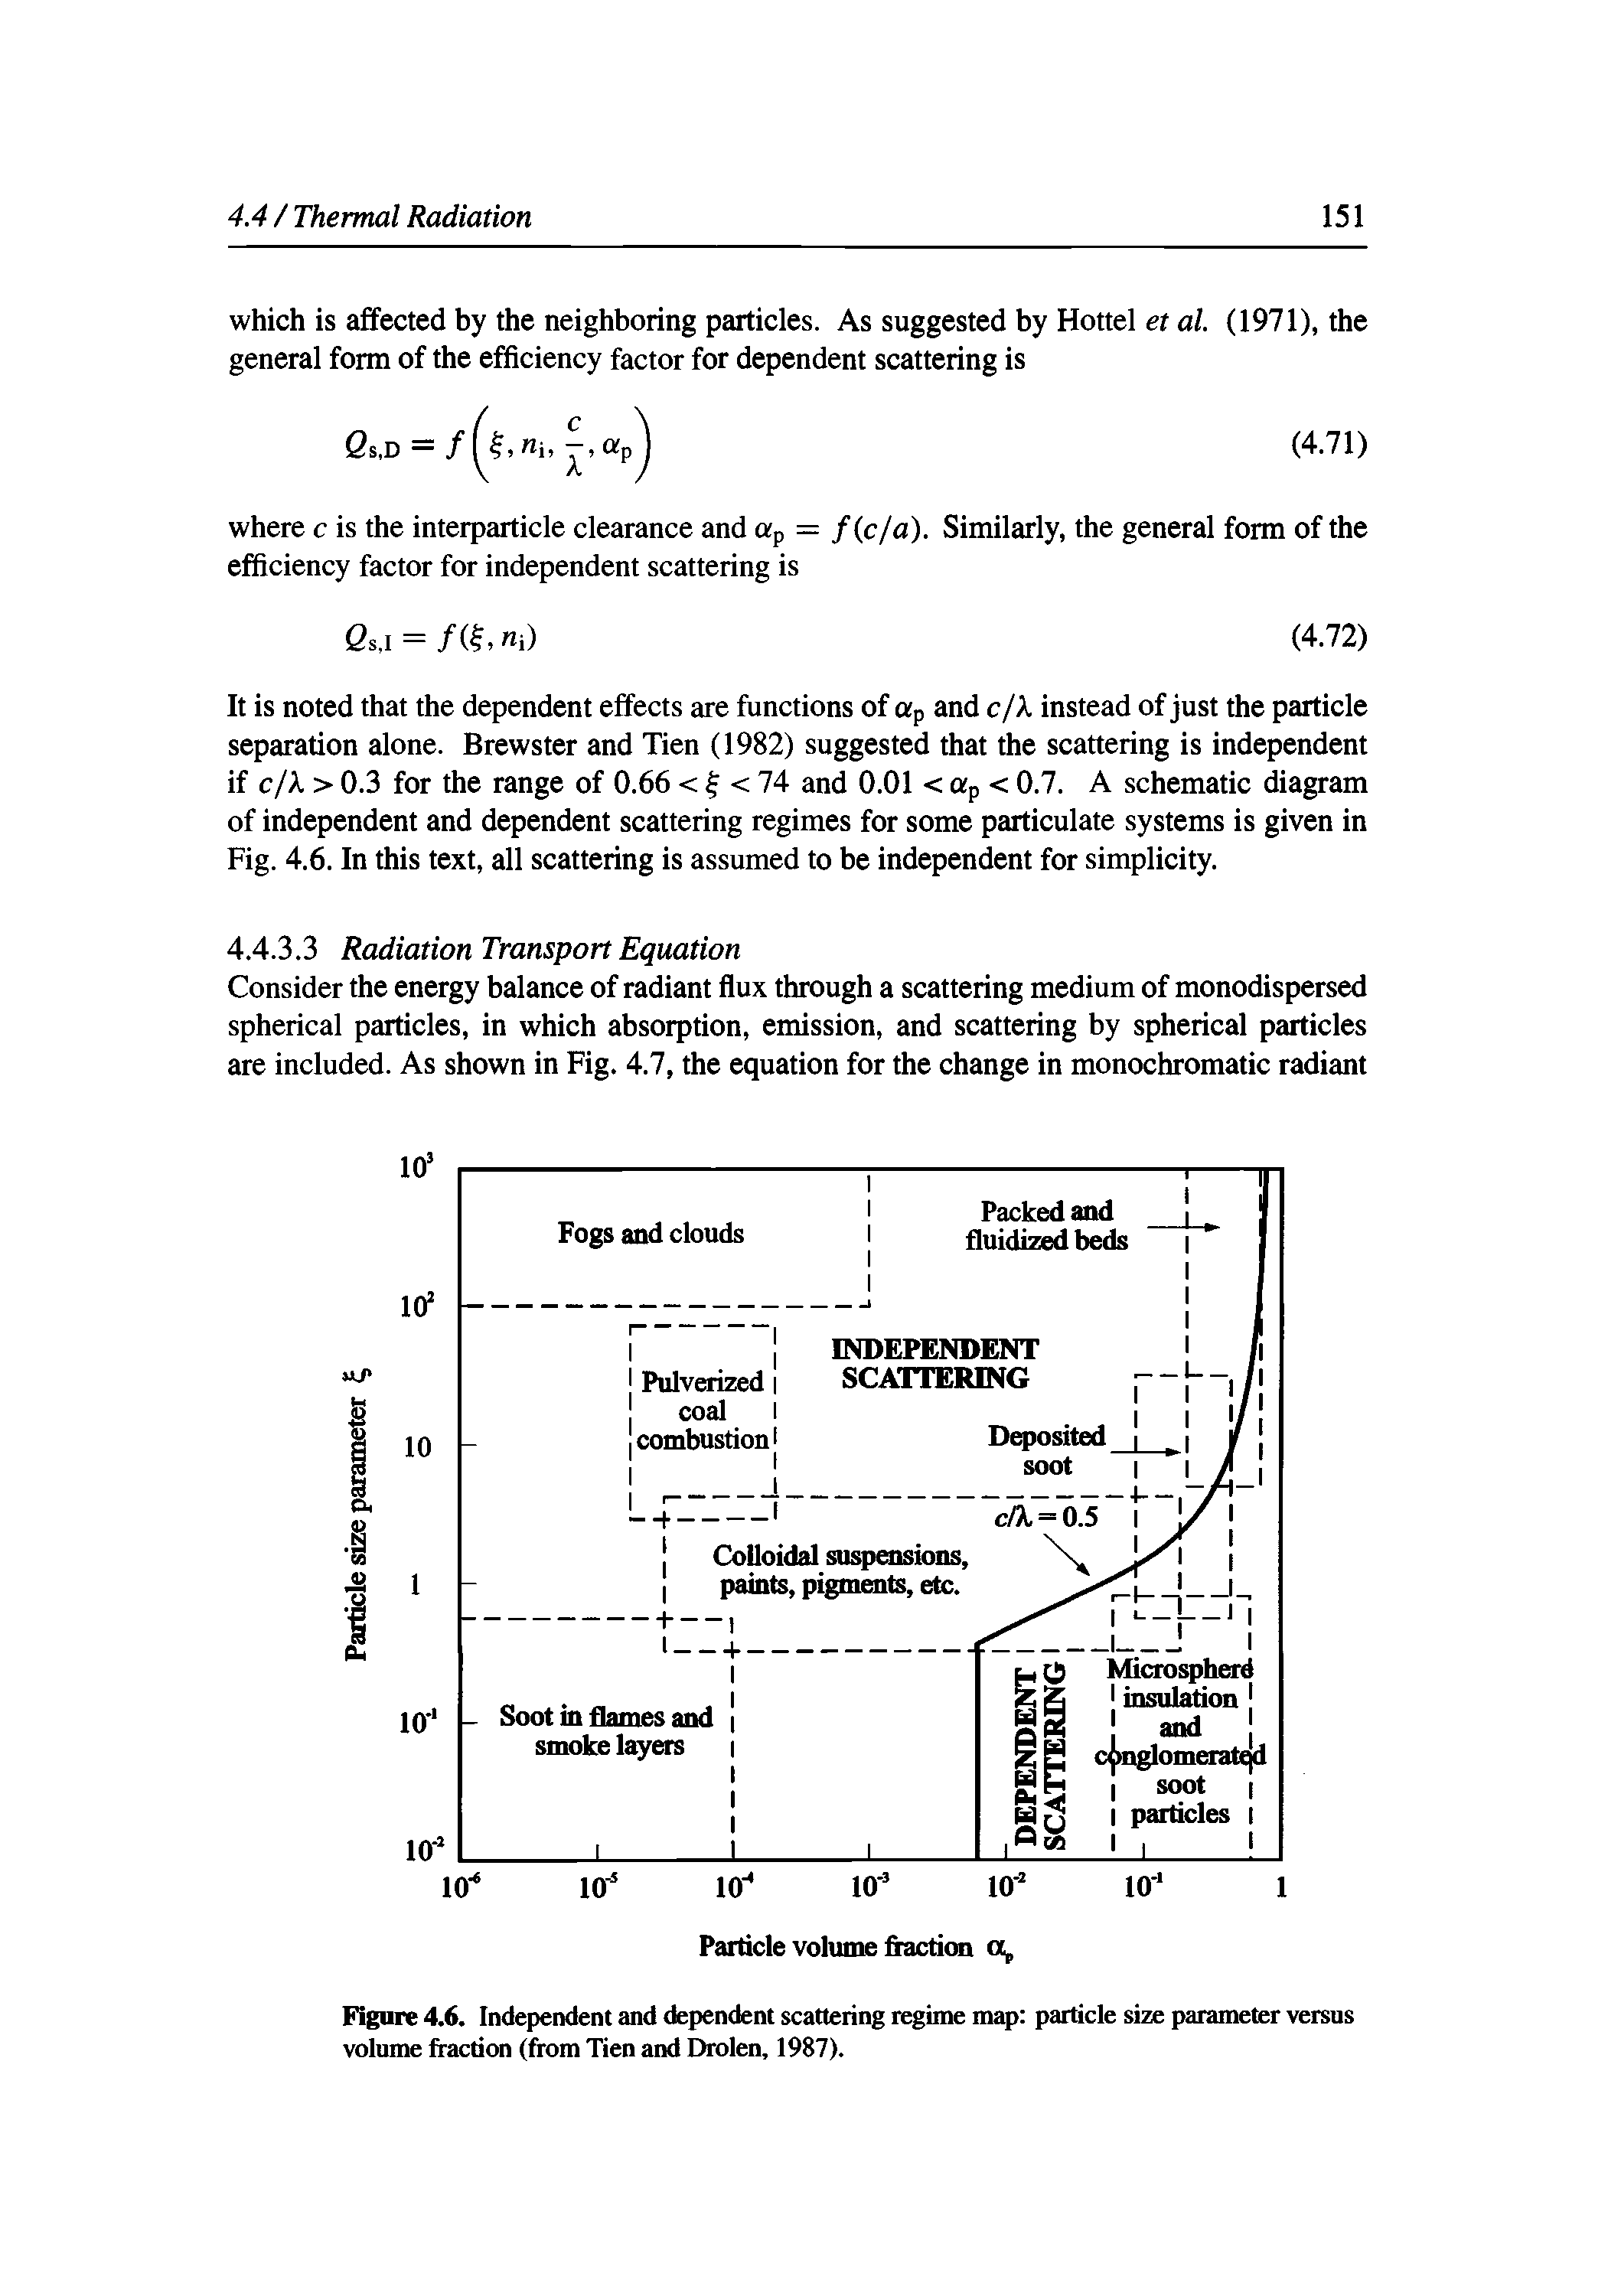 Figure 4.6. Independent and dependent scattering regime map particle size parameter versus volume fraction (from Tien and Drolen, 1987).